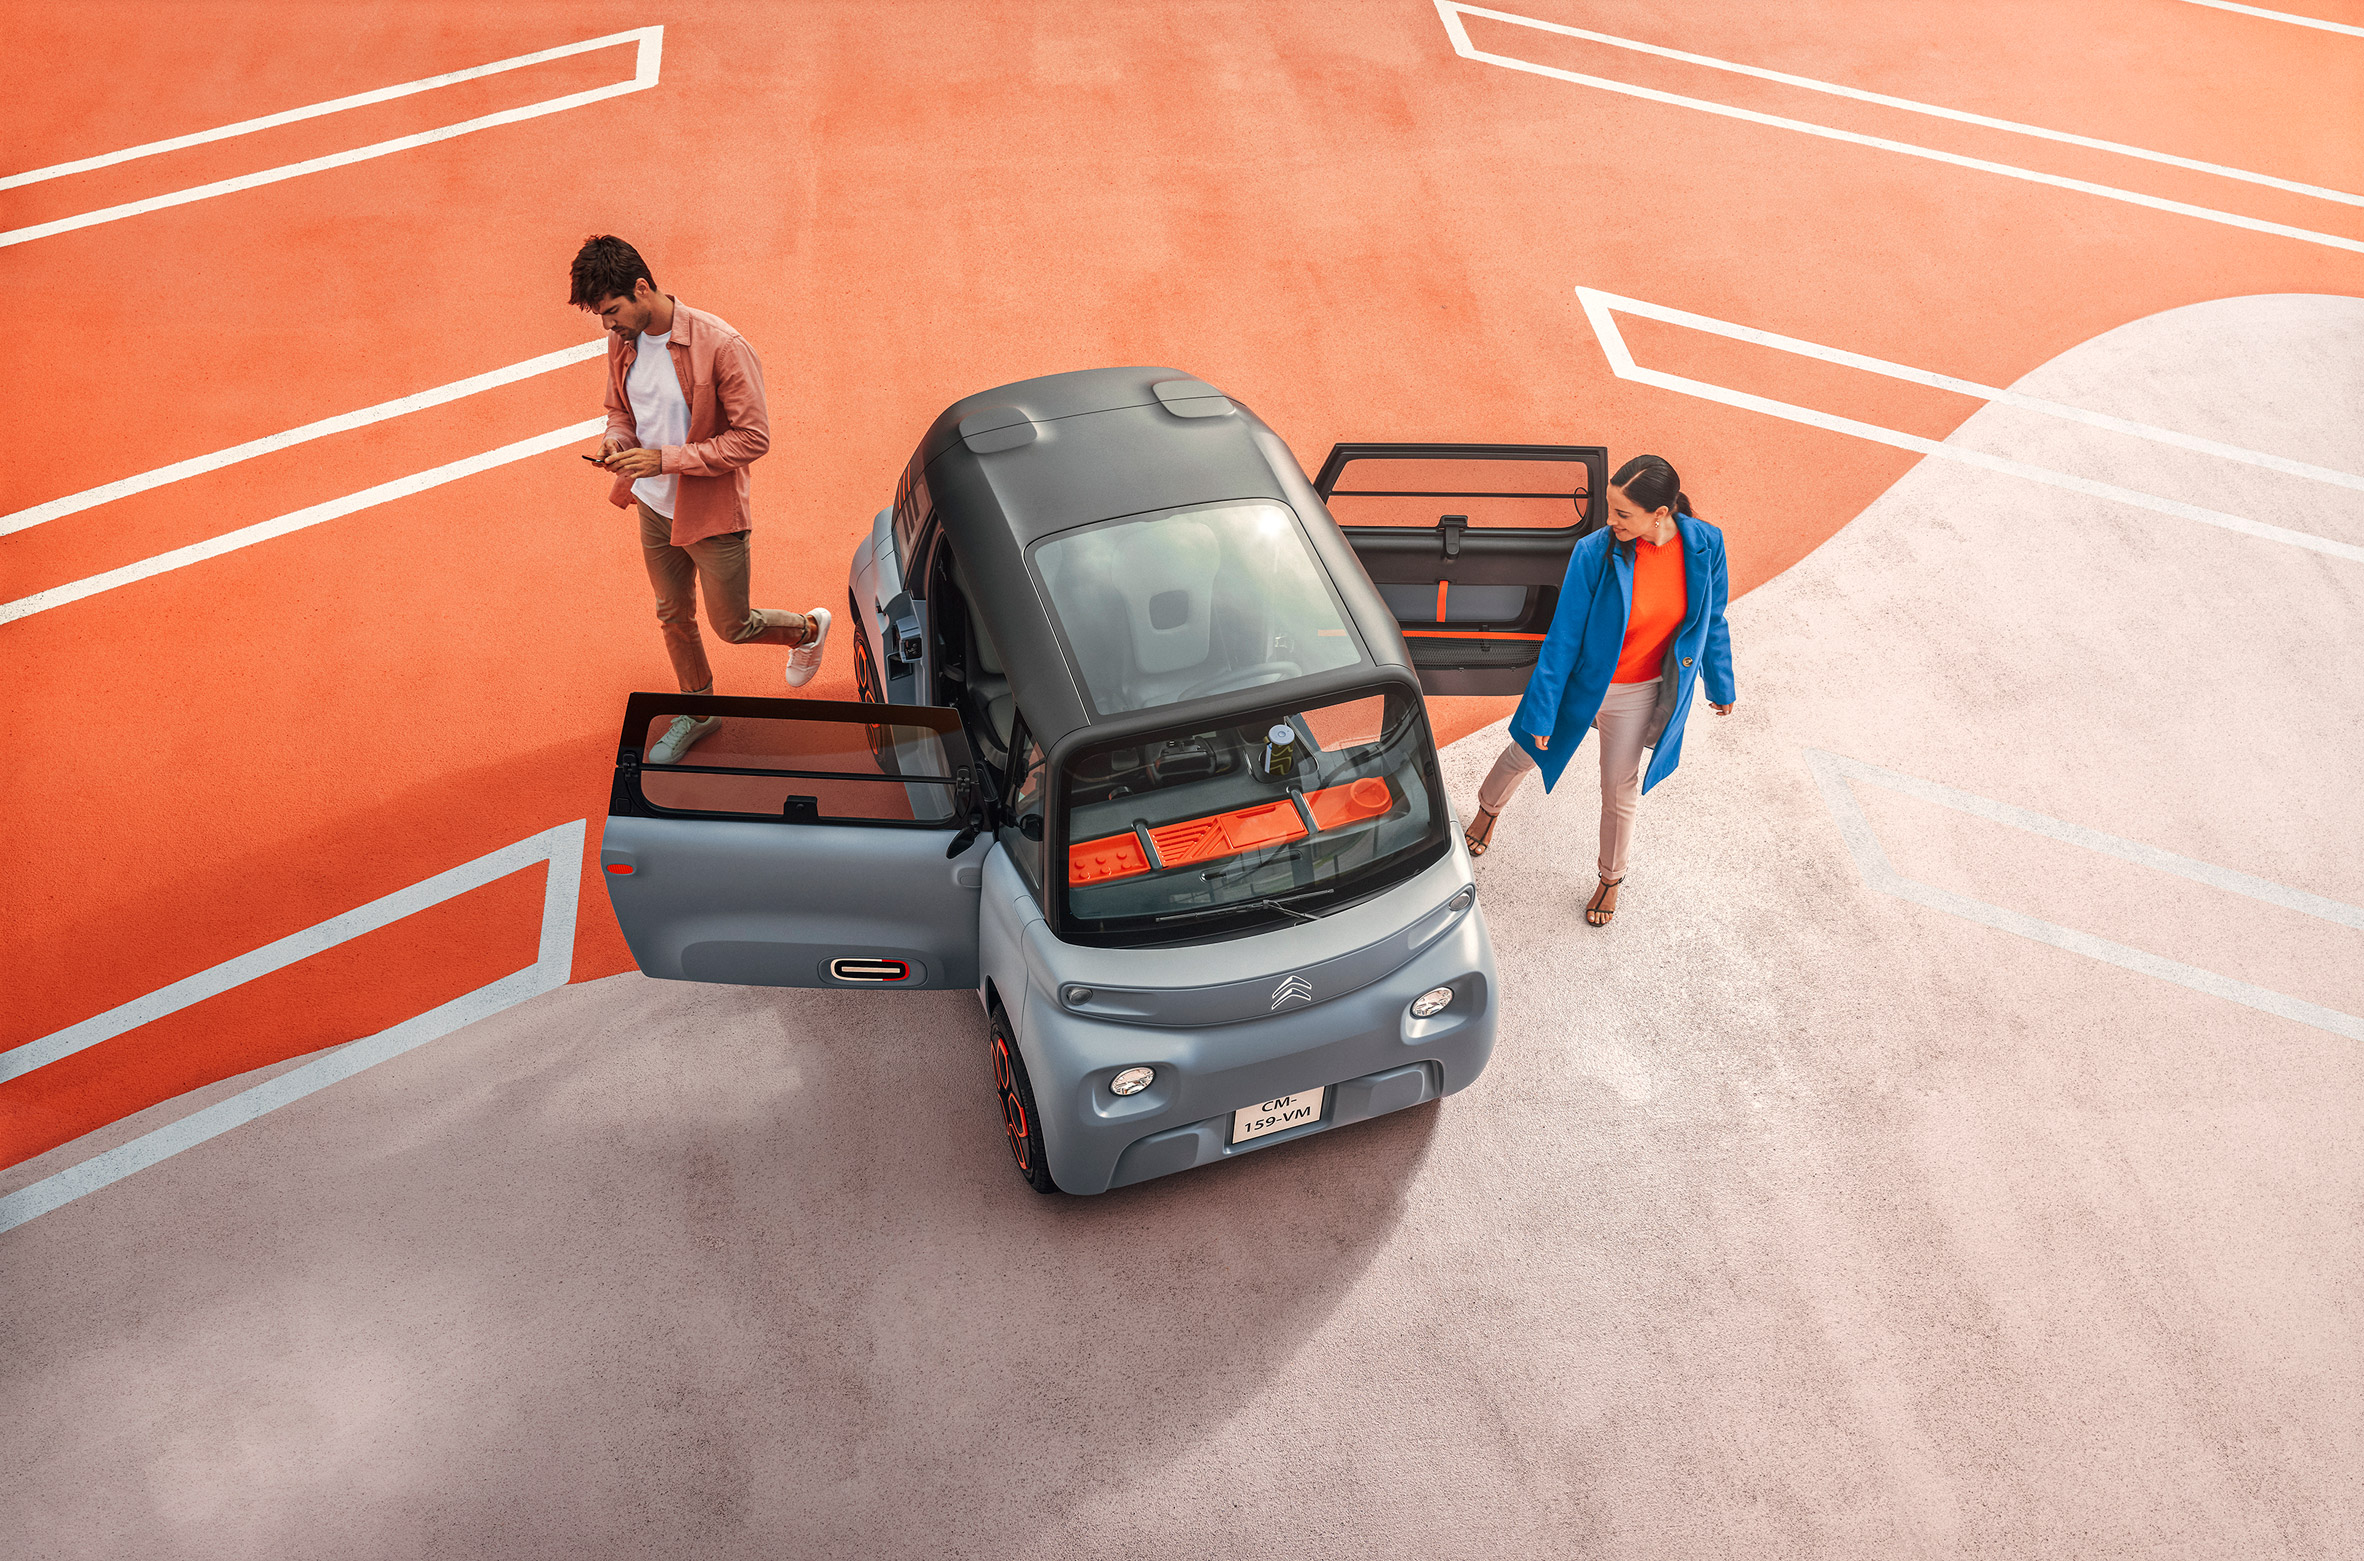 Citroën rolls out accessible-to-all Ami car that works "just like a smartphone"